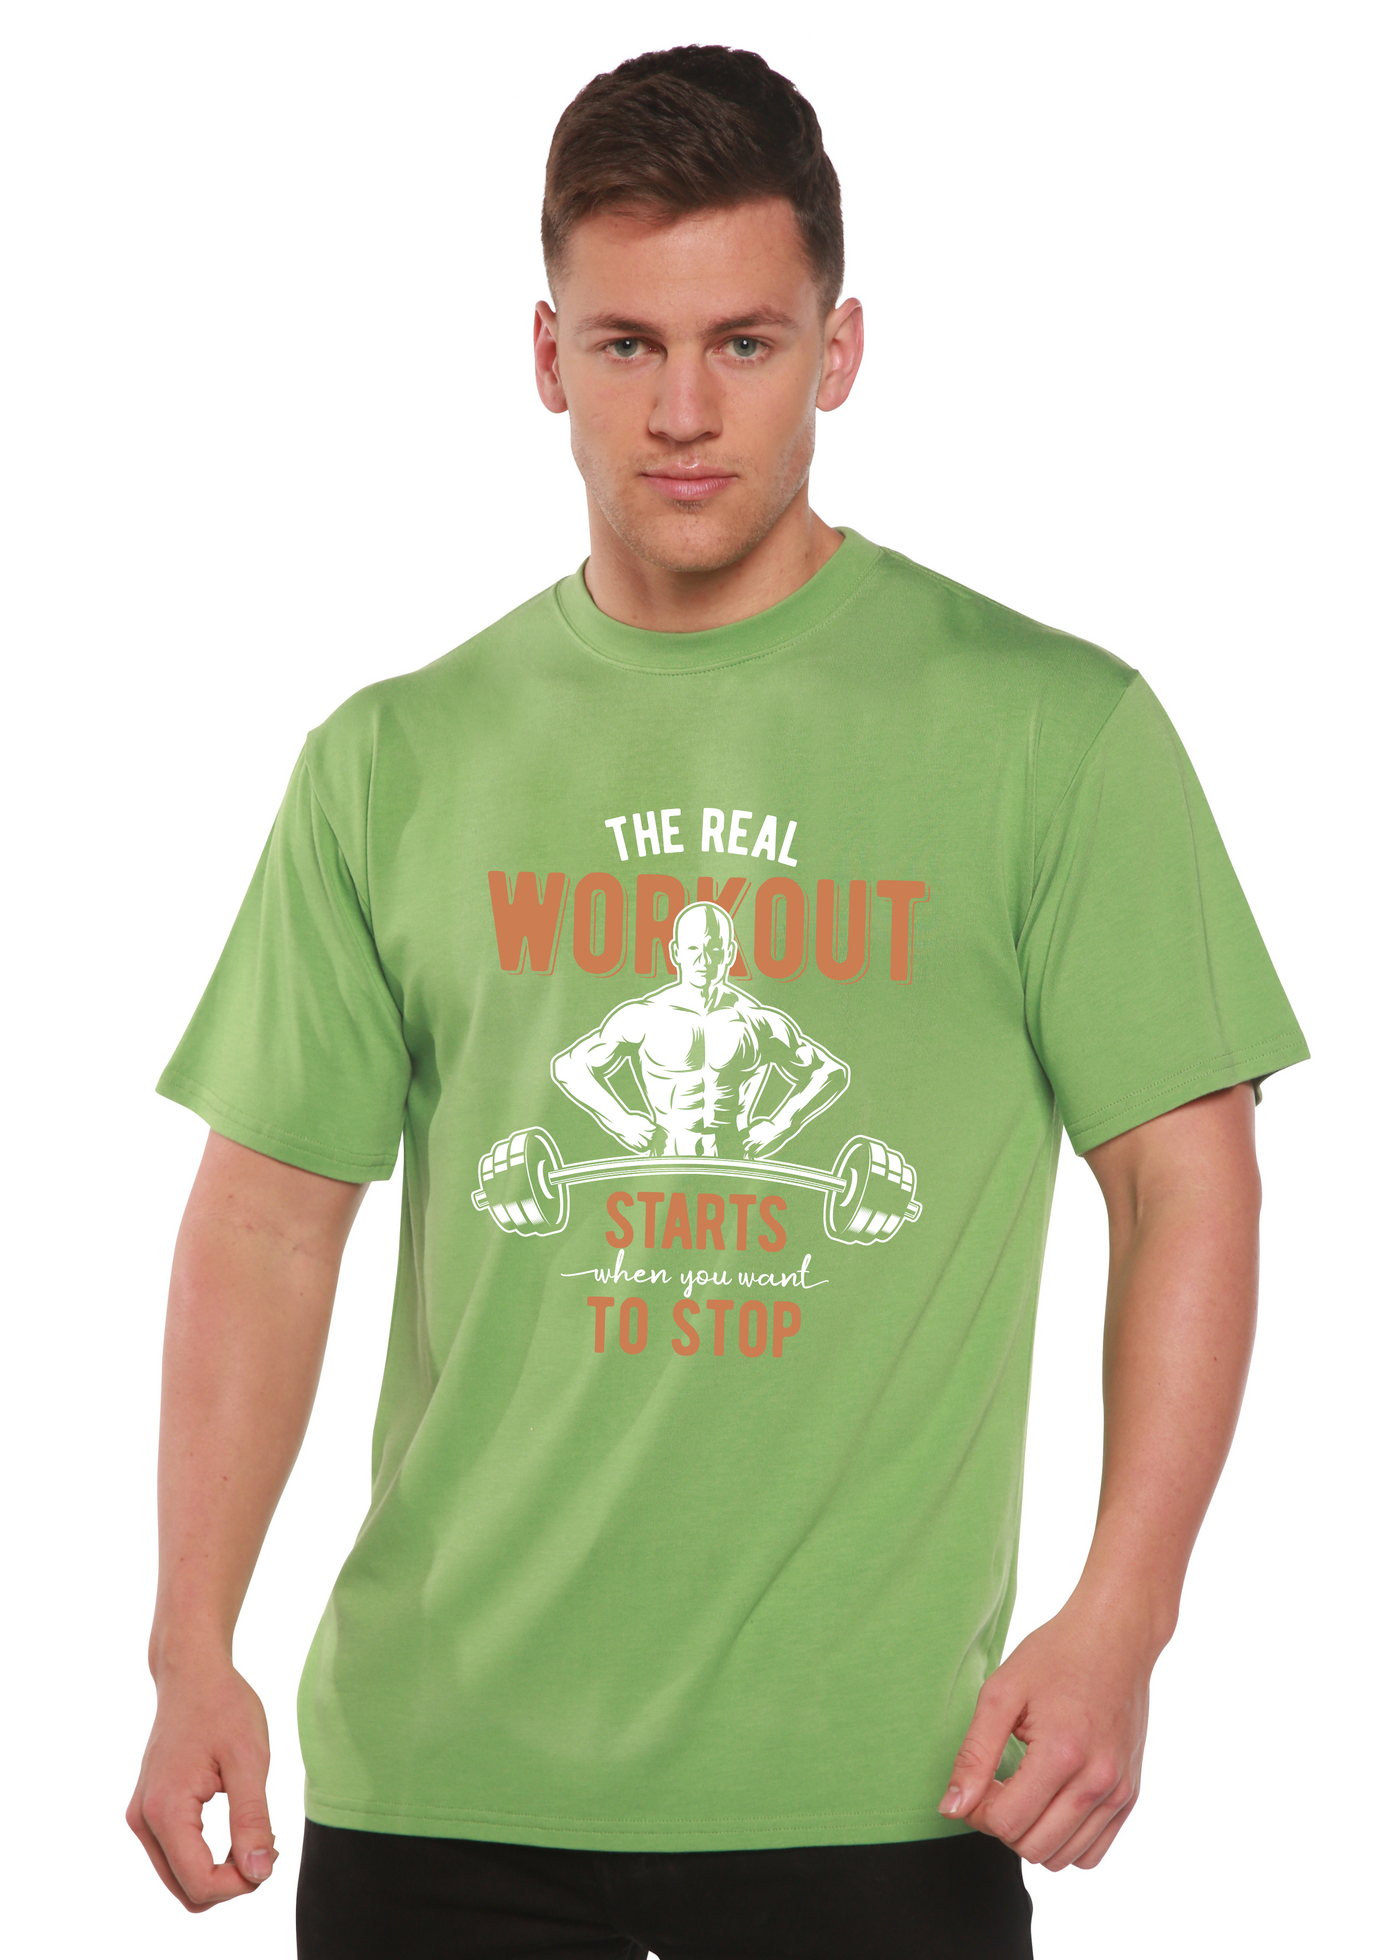 The Real Workout men's bamboo tshirt green tea